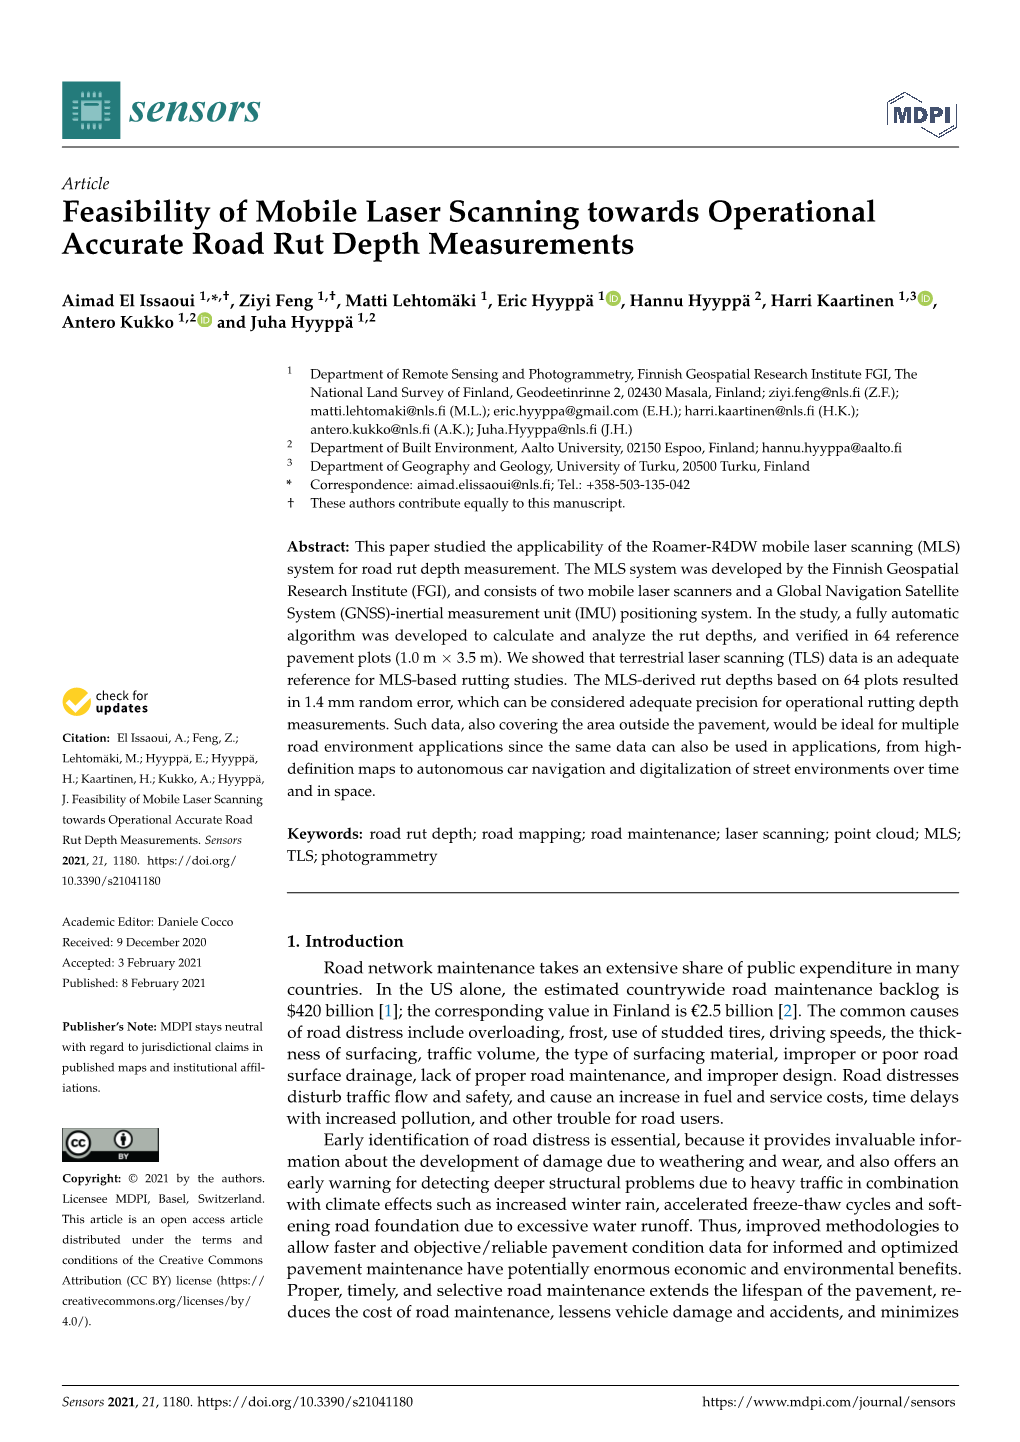 Feasibility of Mobile Laser Scanning Towards Operational Accurate Road Rut Depth Measurements